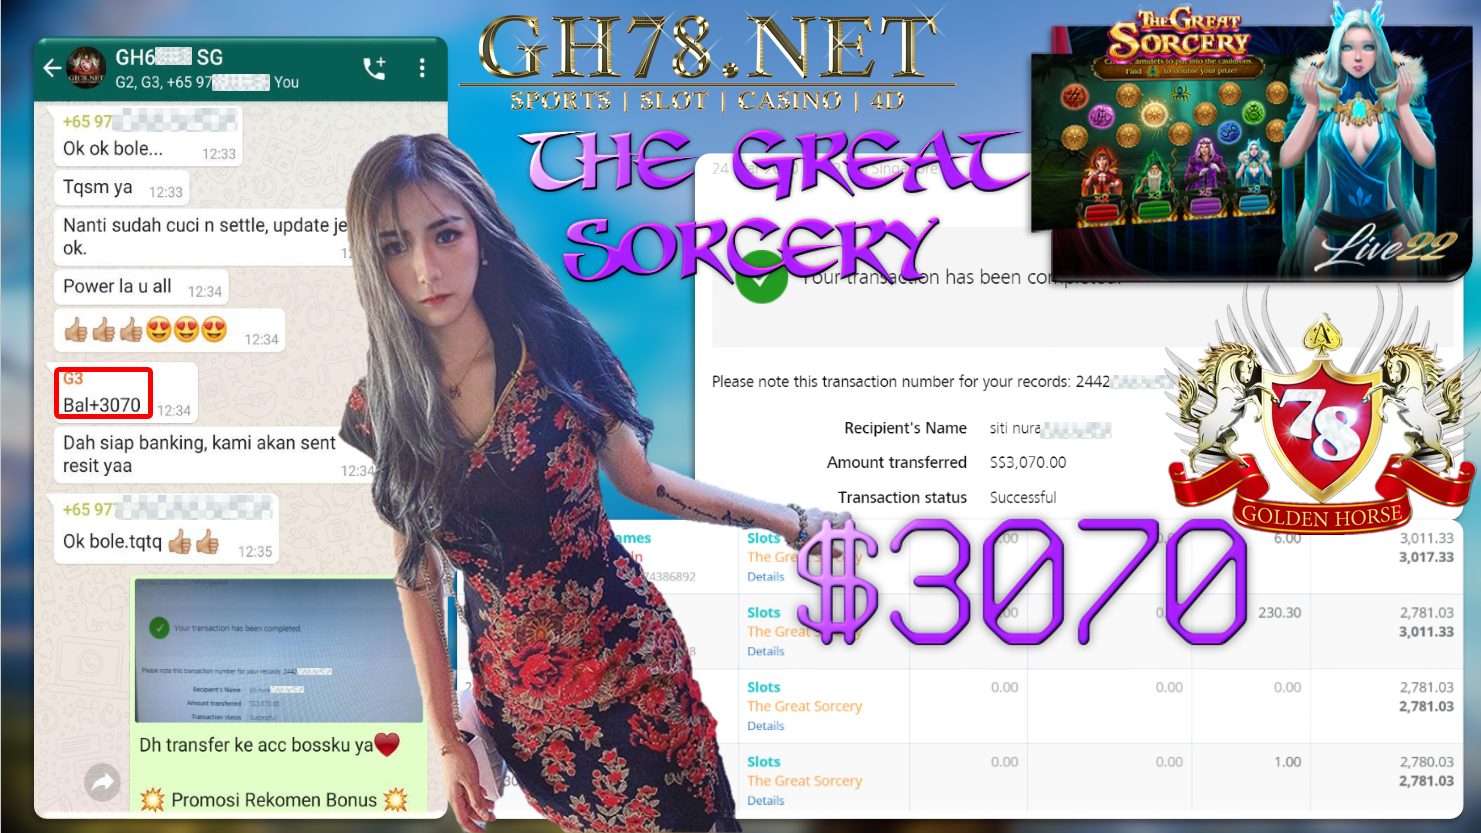 MEMBER MAIN LIVE22 GAME THE GREAT SORCERY MINTA OUT $3070 !!